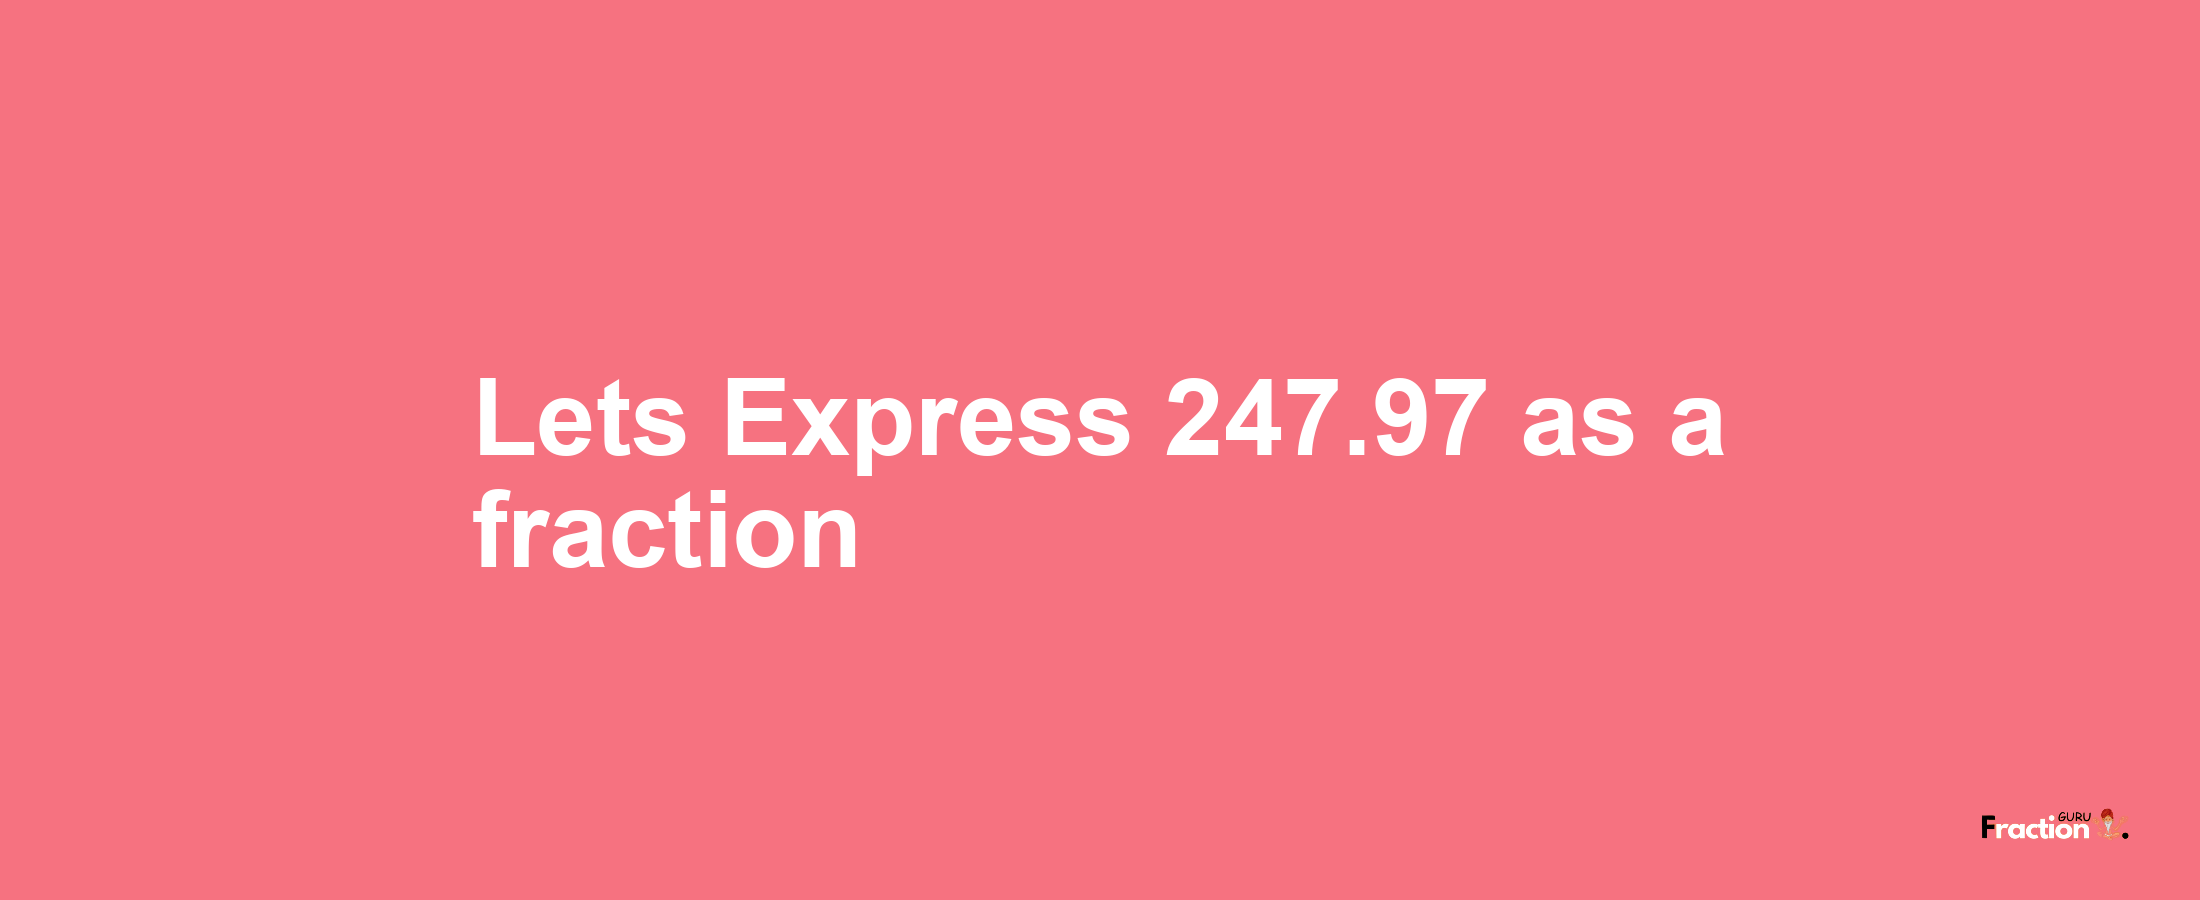 Lets Express 247.97 as afraction